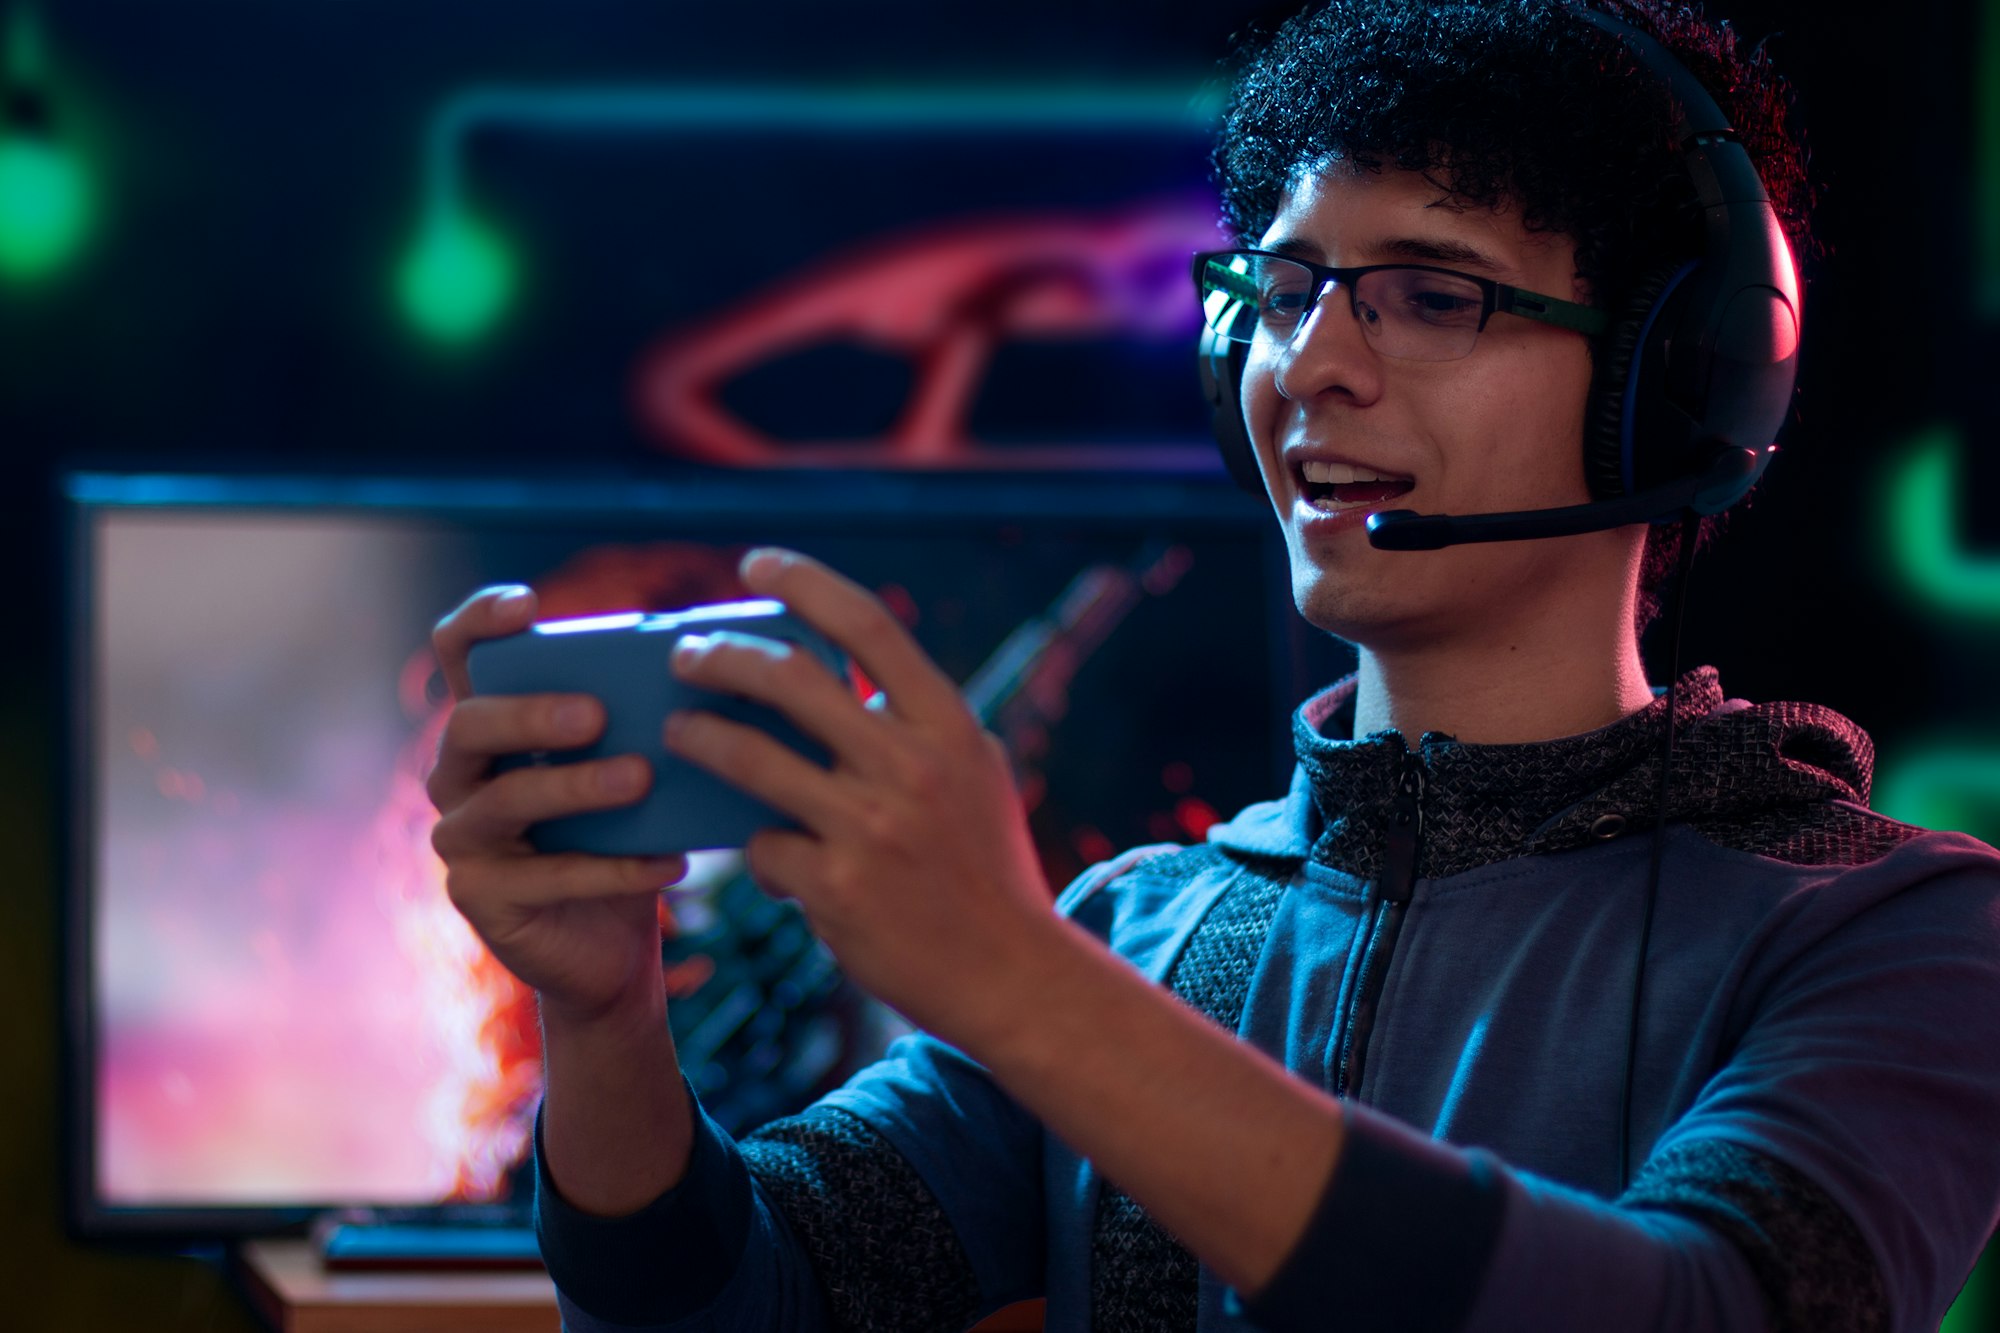 A young Latino adult immersed and happy in a mobile gaming experience with a headset